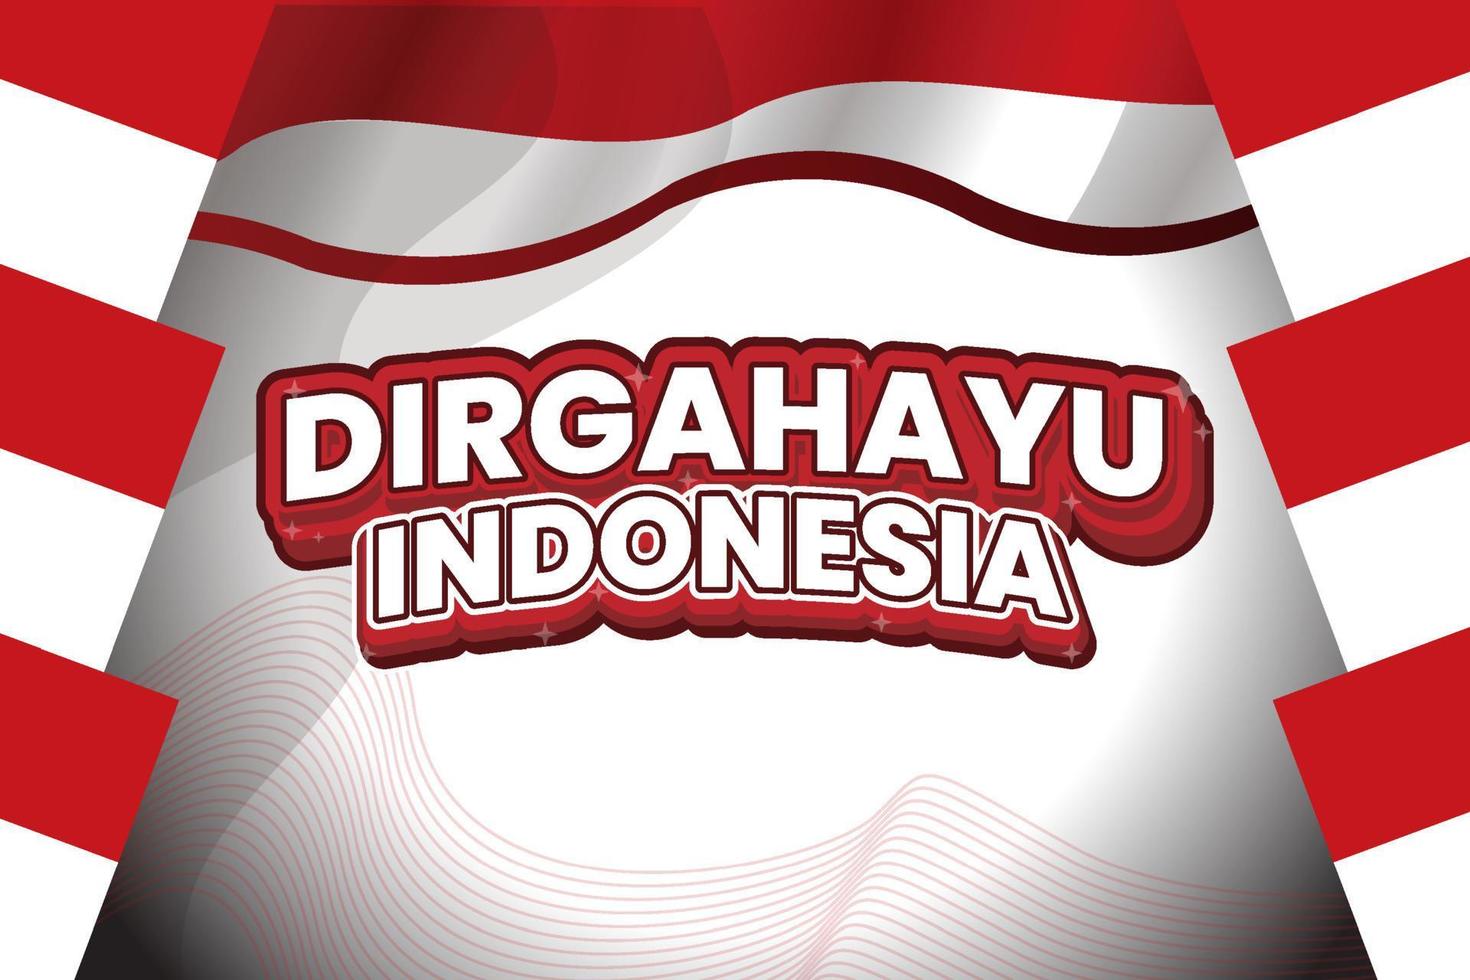 Indonesian independence day banner vector design with red and white flag background